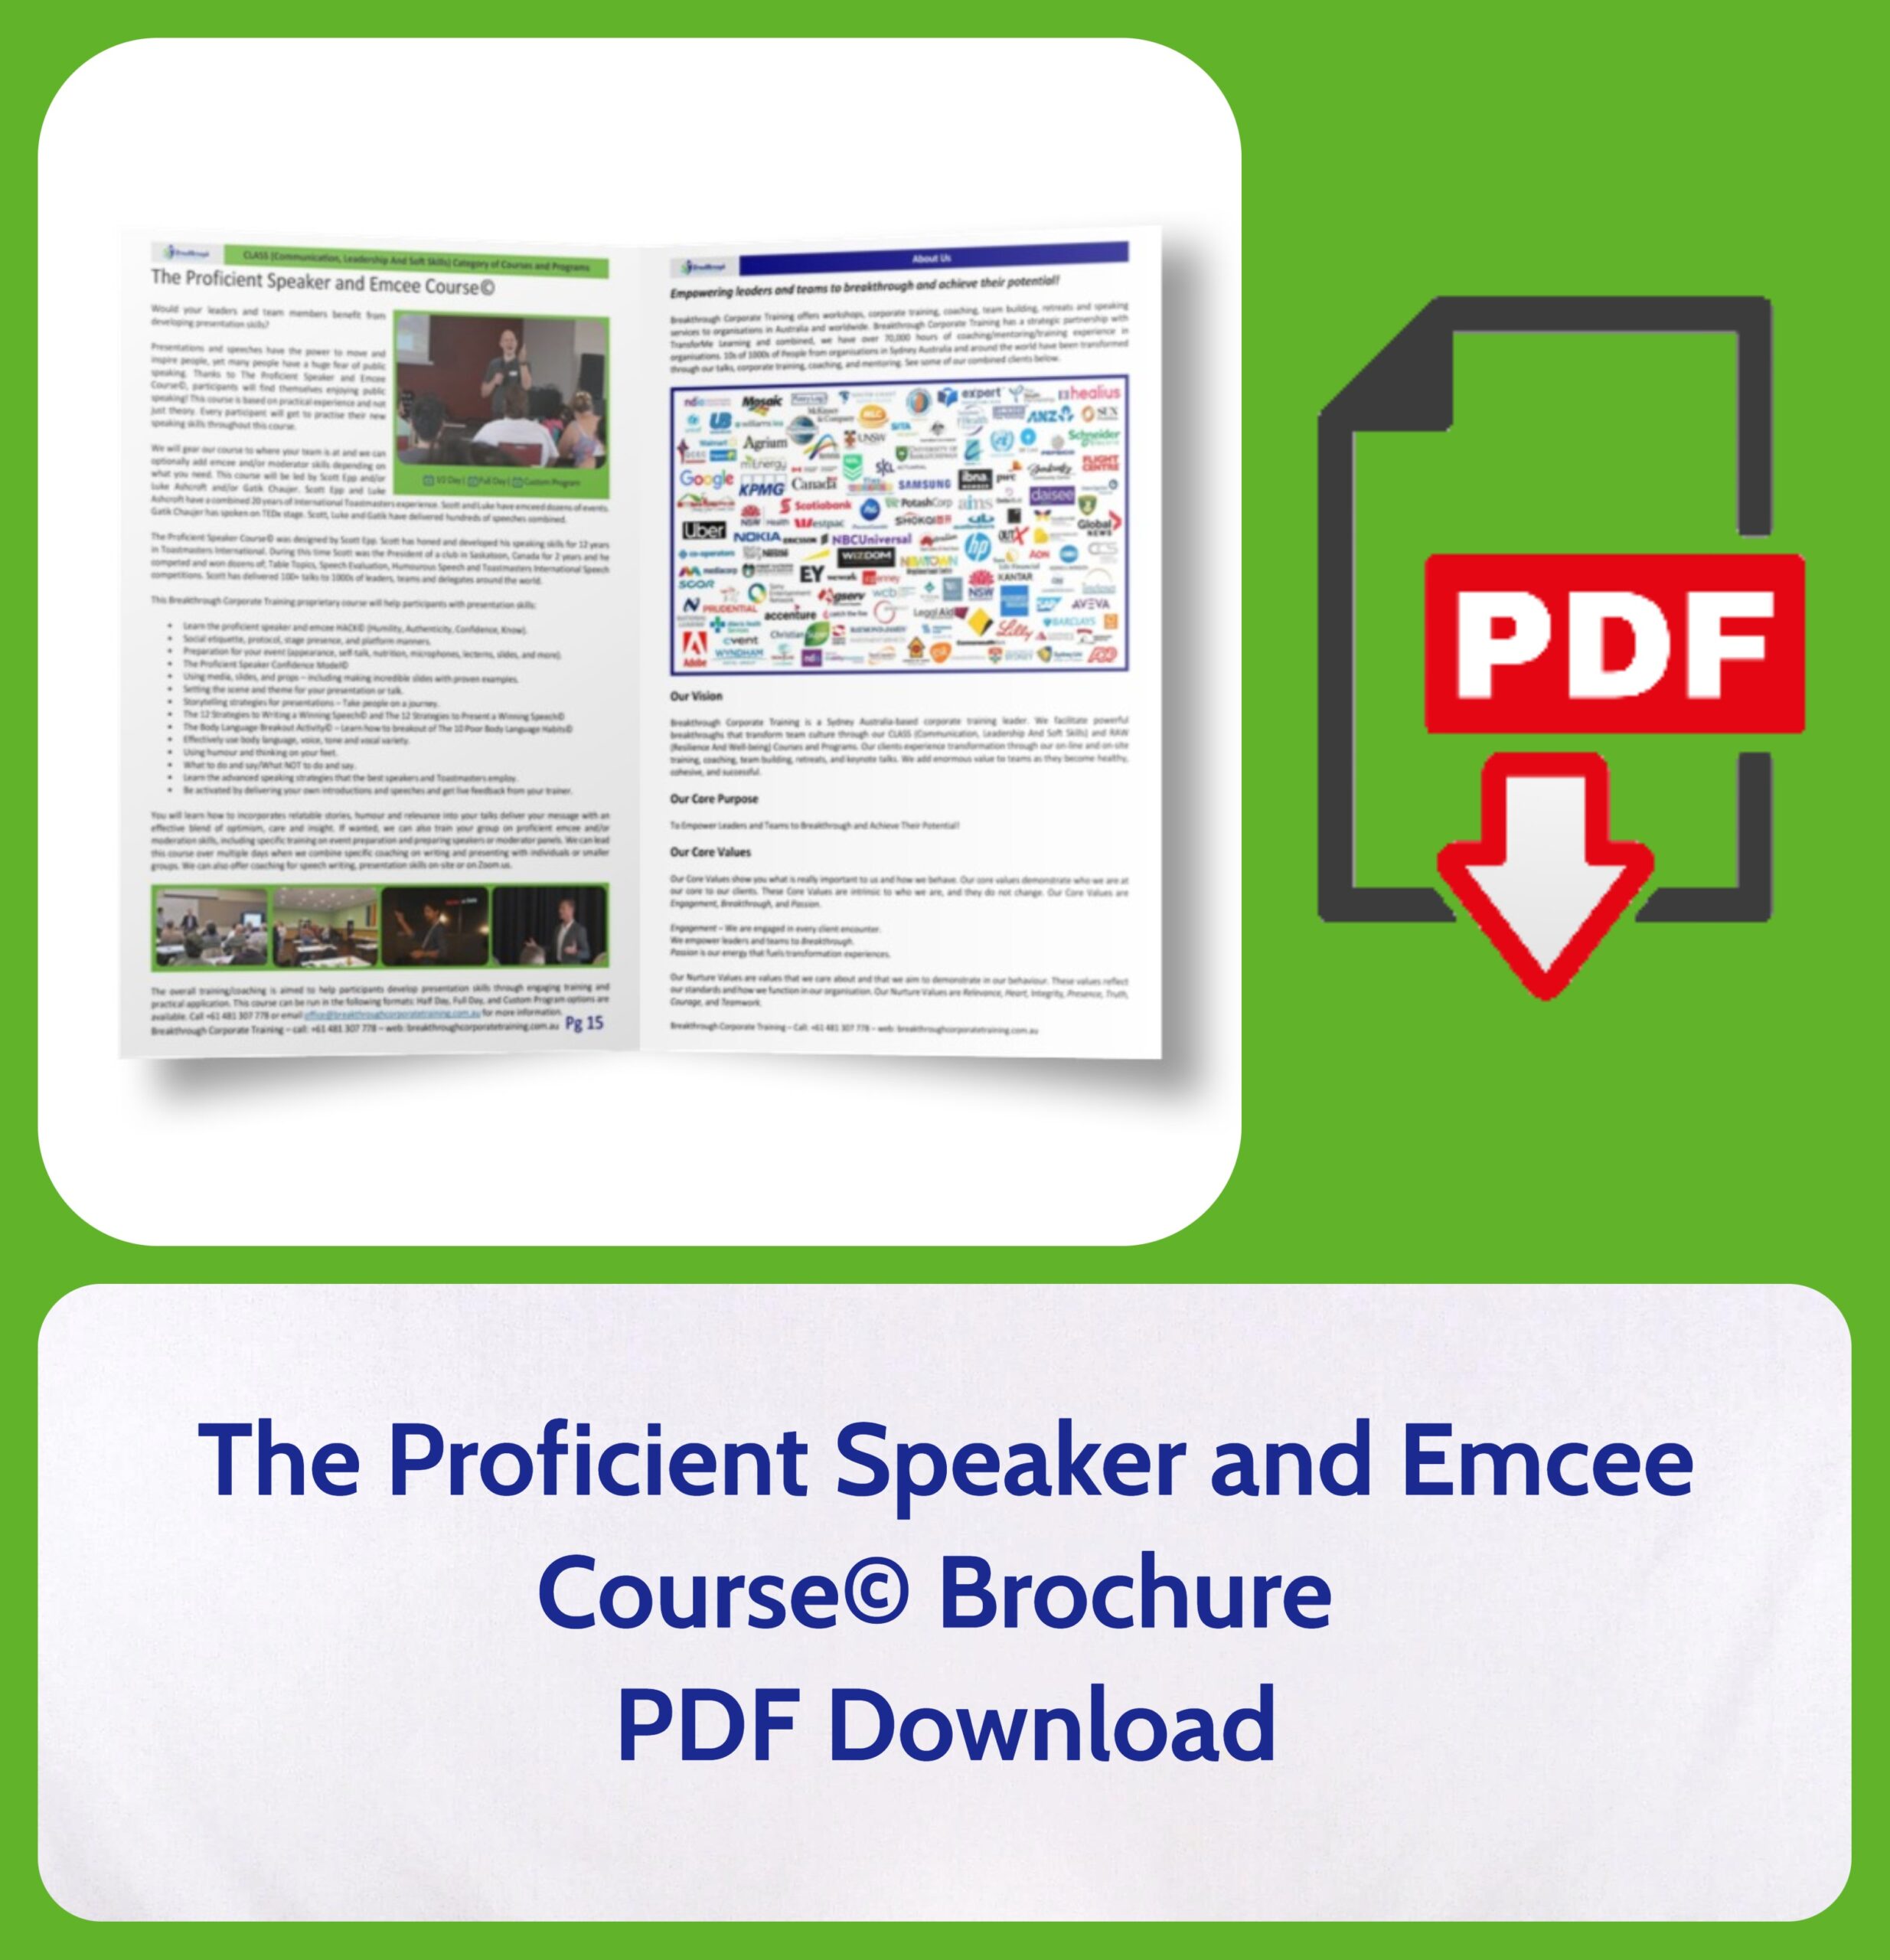 The Proficient Speaker and Emcee Course